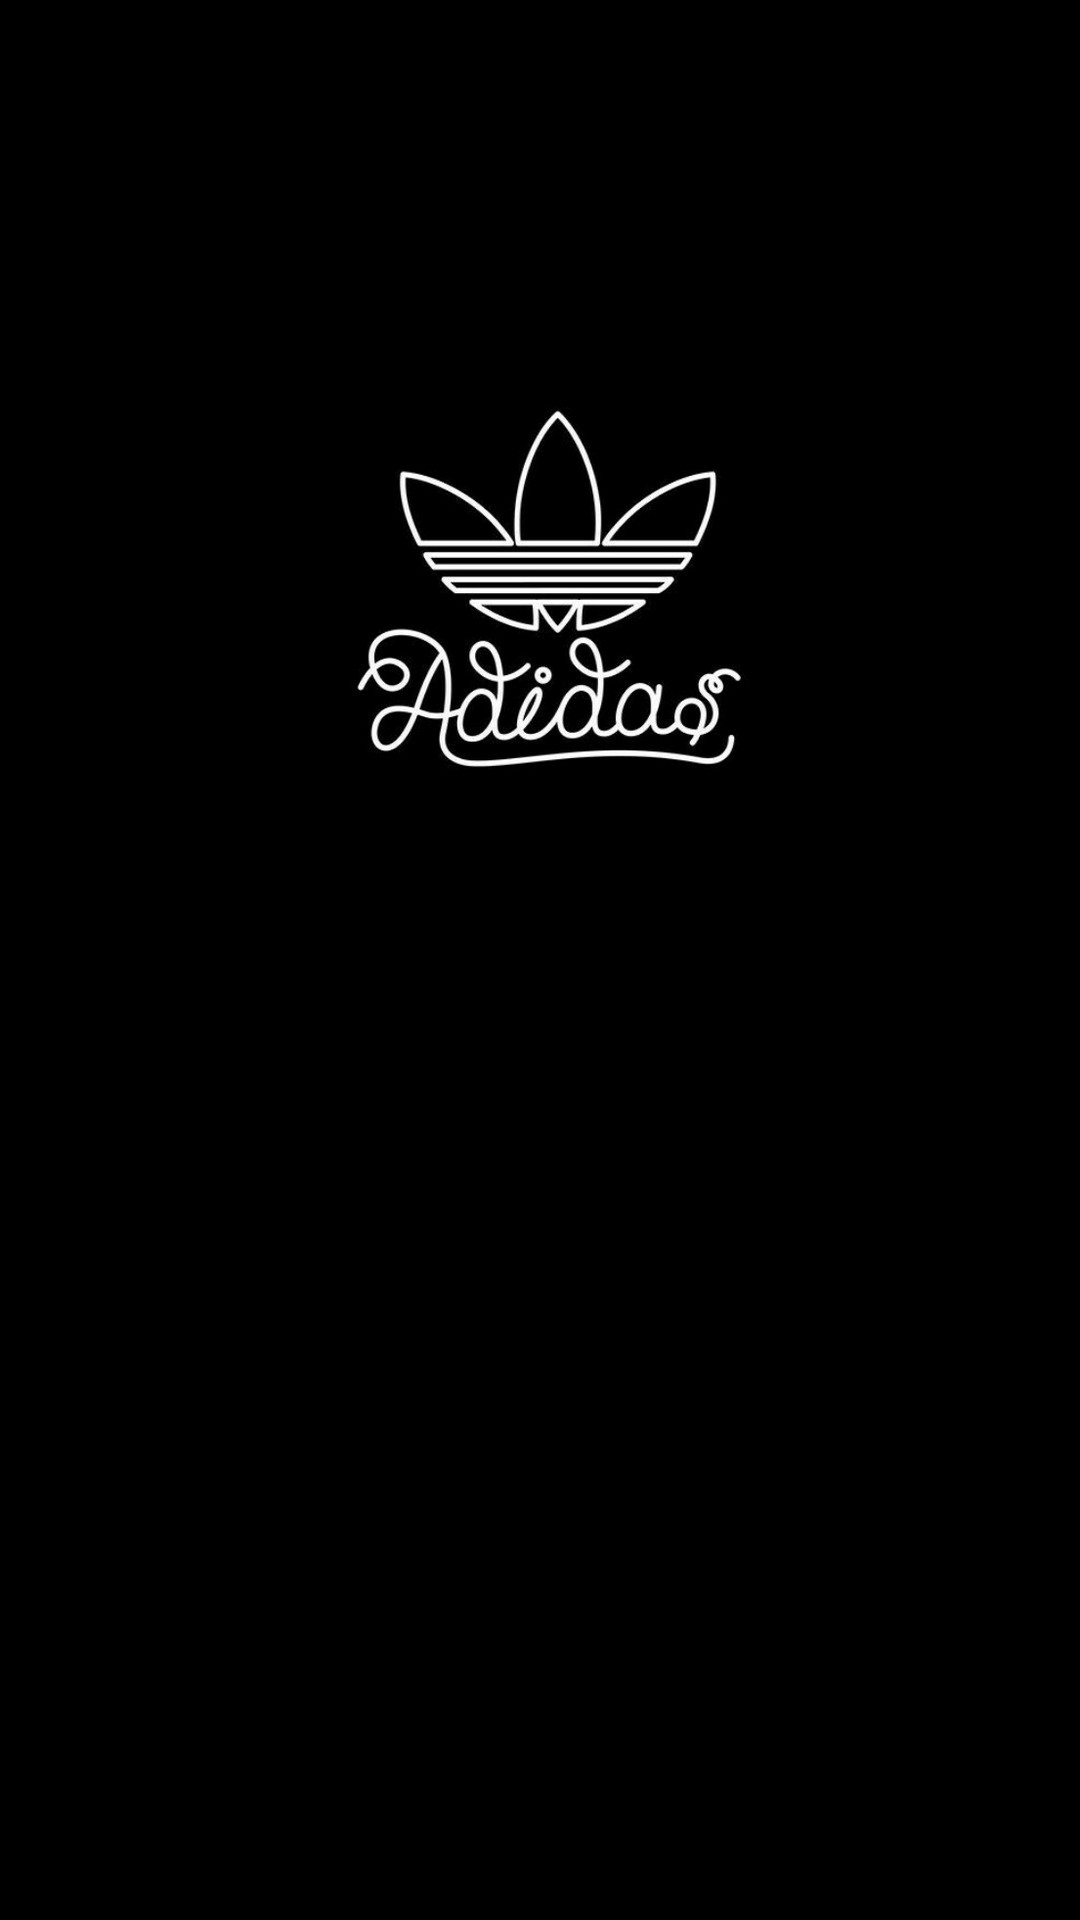 Wallpaper Android Adidas Logo With high-resolution 1080X1920 pixel. You can use this wallpaper for your Android backgrounds, Tablet, Samsung Screensavers, Mobile Phone Lock Screen and another Smartphones device